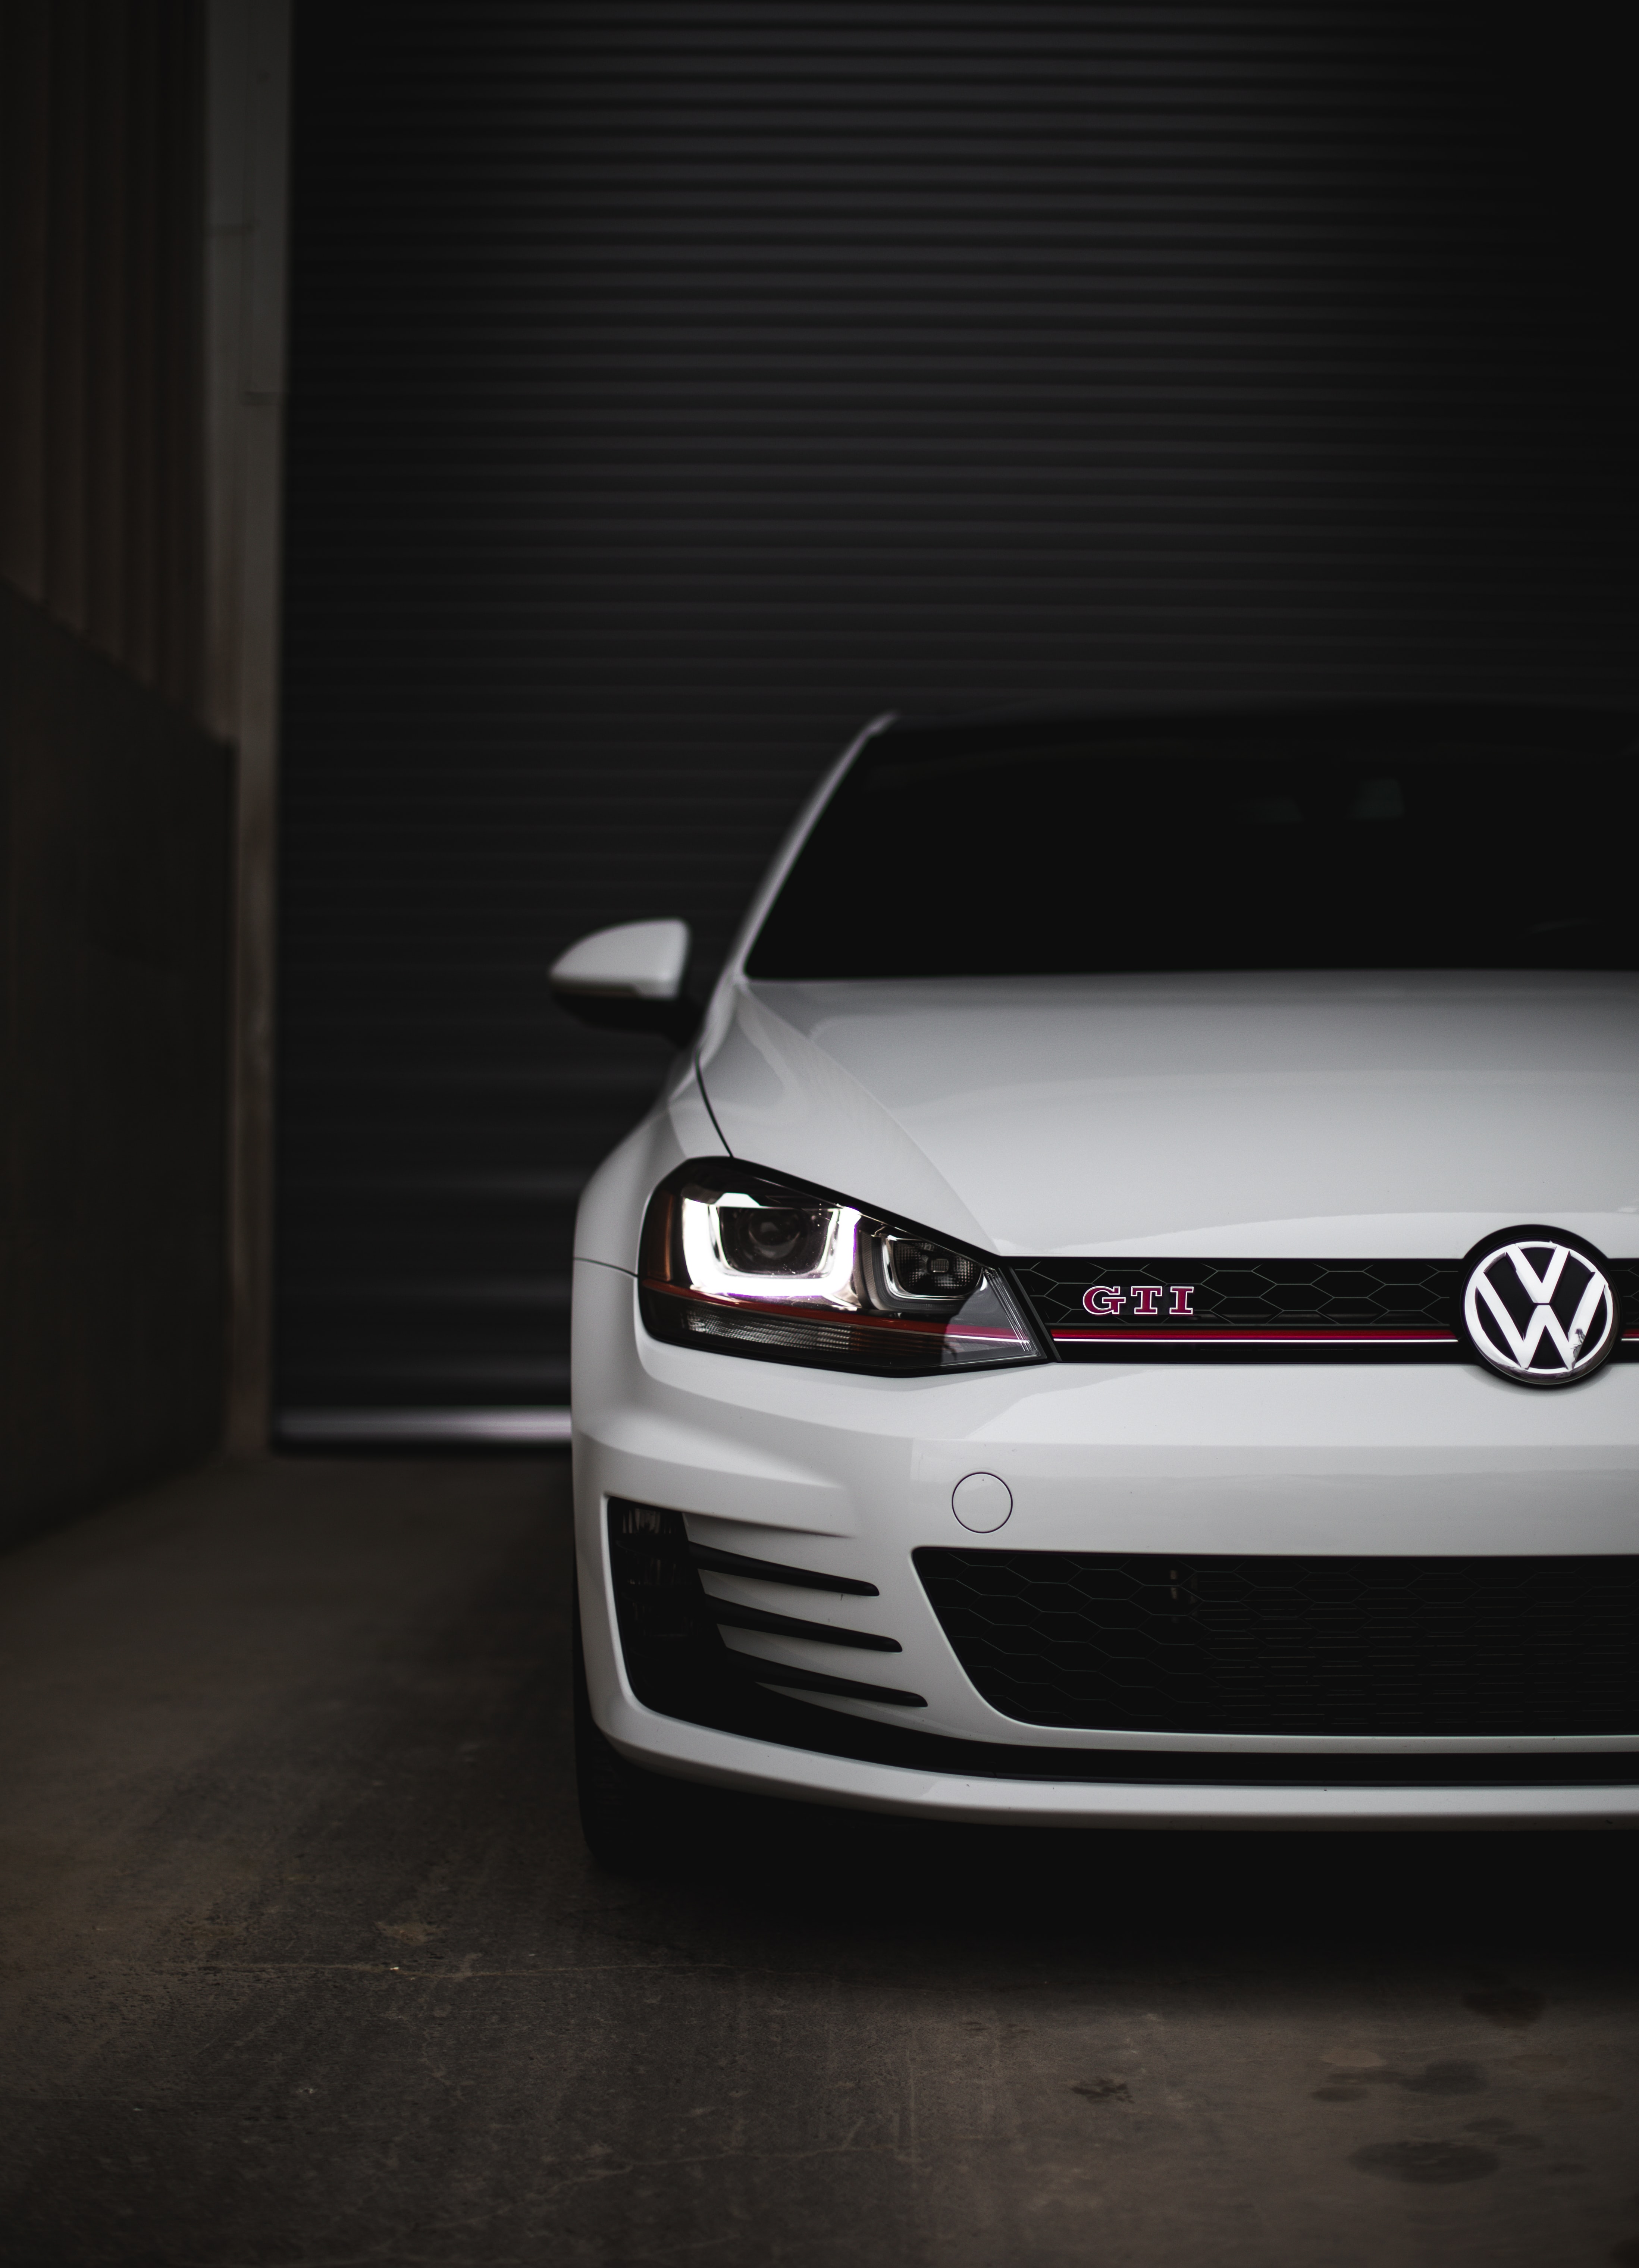 94718 download wallpaper volkswagen golf gti, volkswagen, cars, white, car screensavers and pictures for free